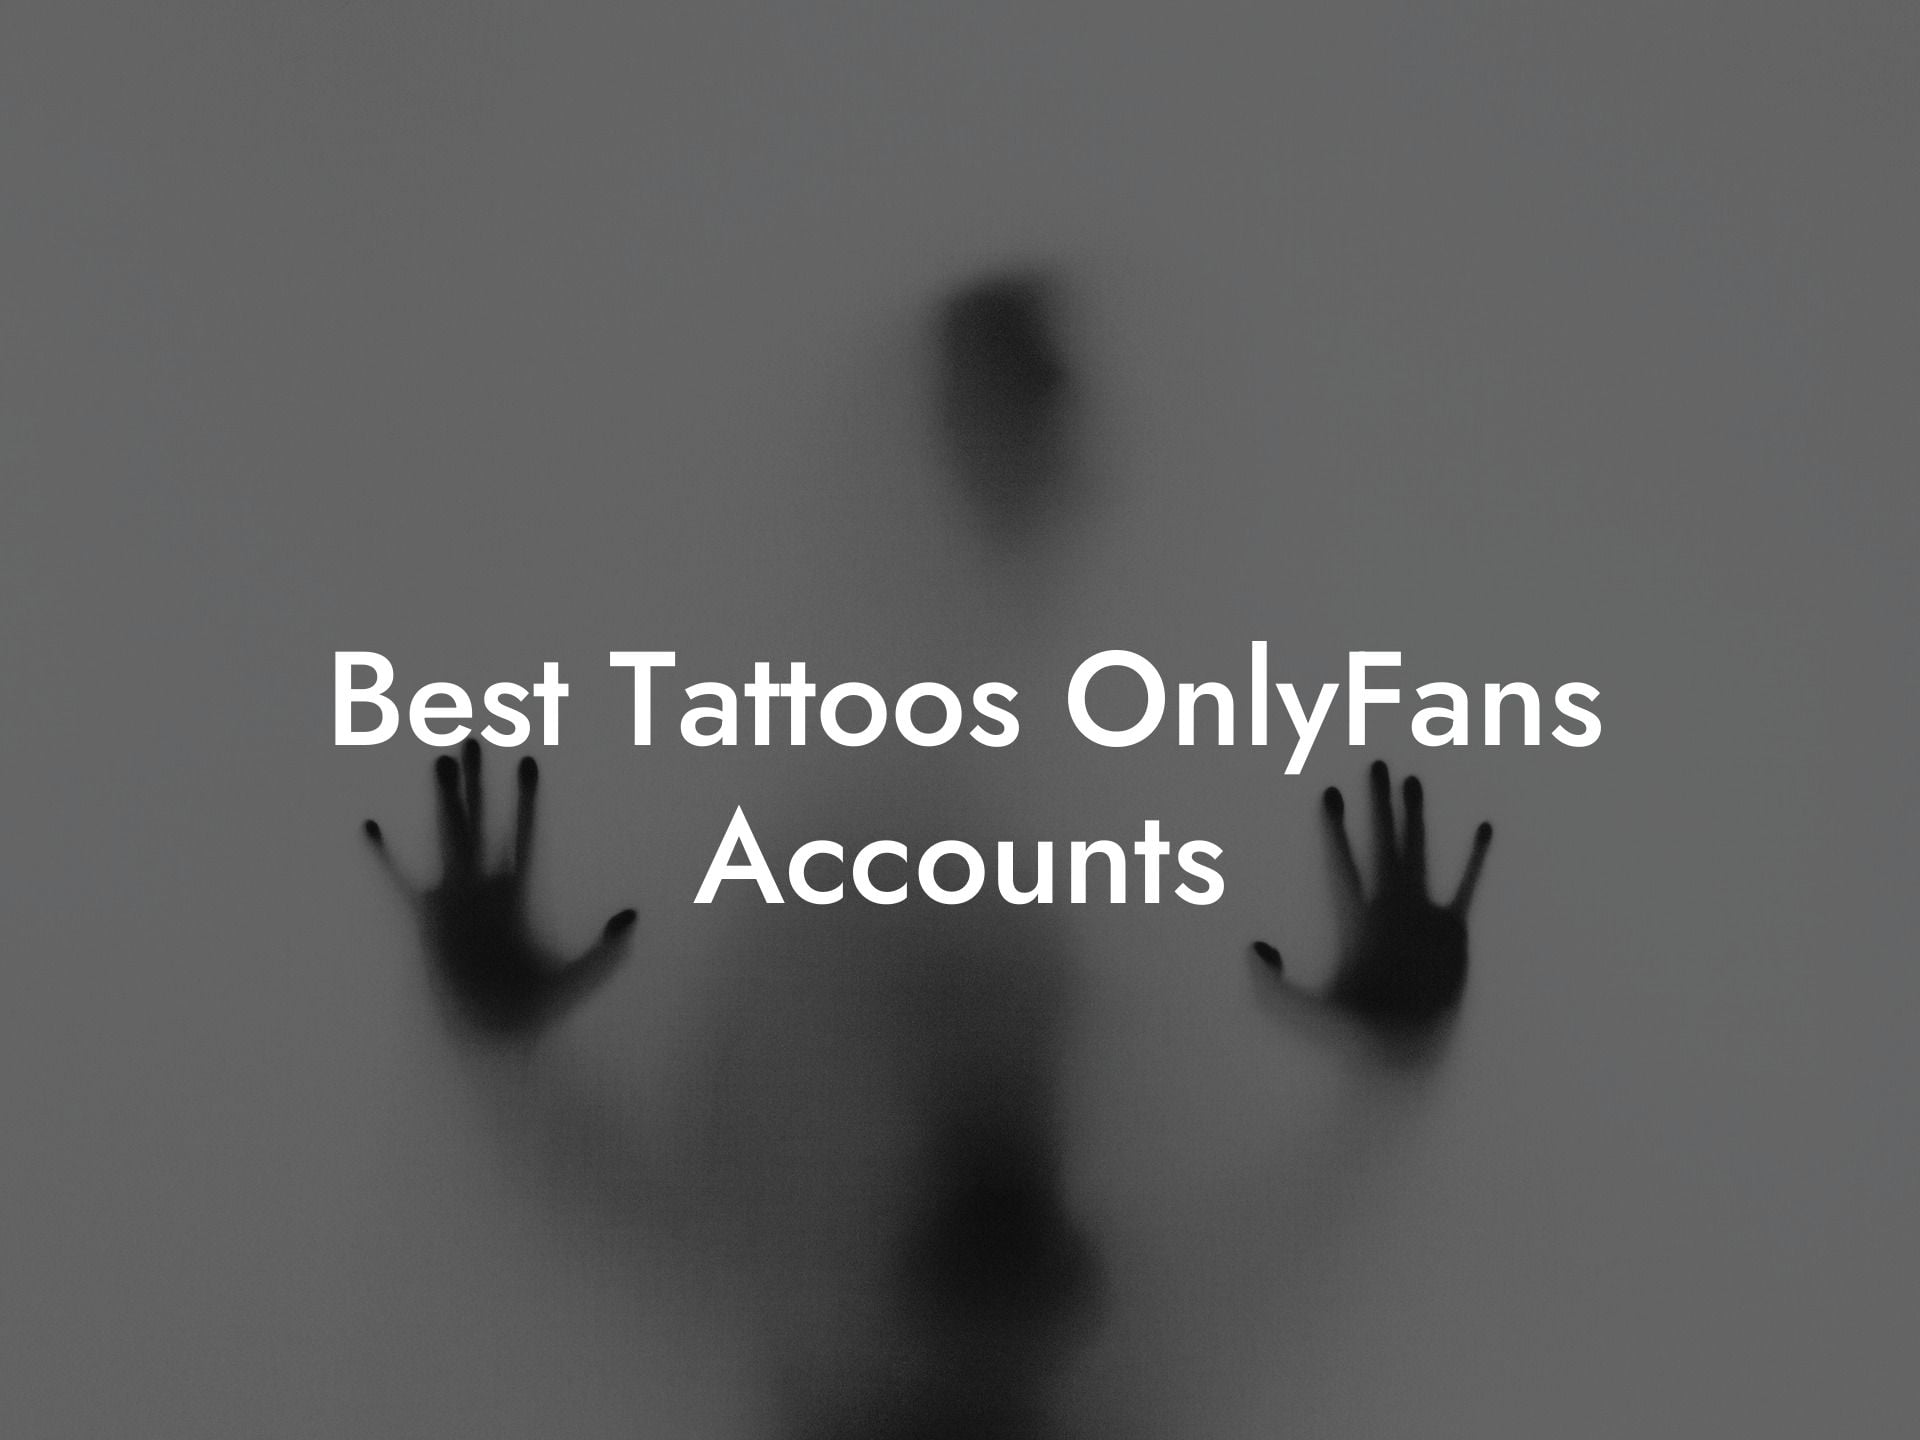 Best Tattoos OnlyFans Accounts